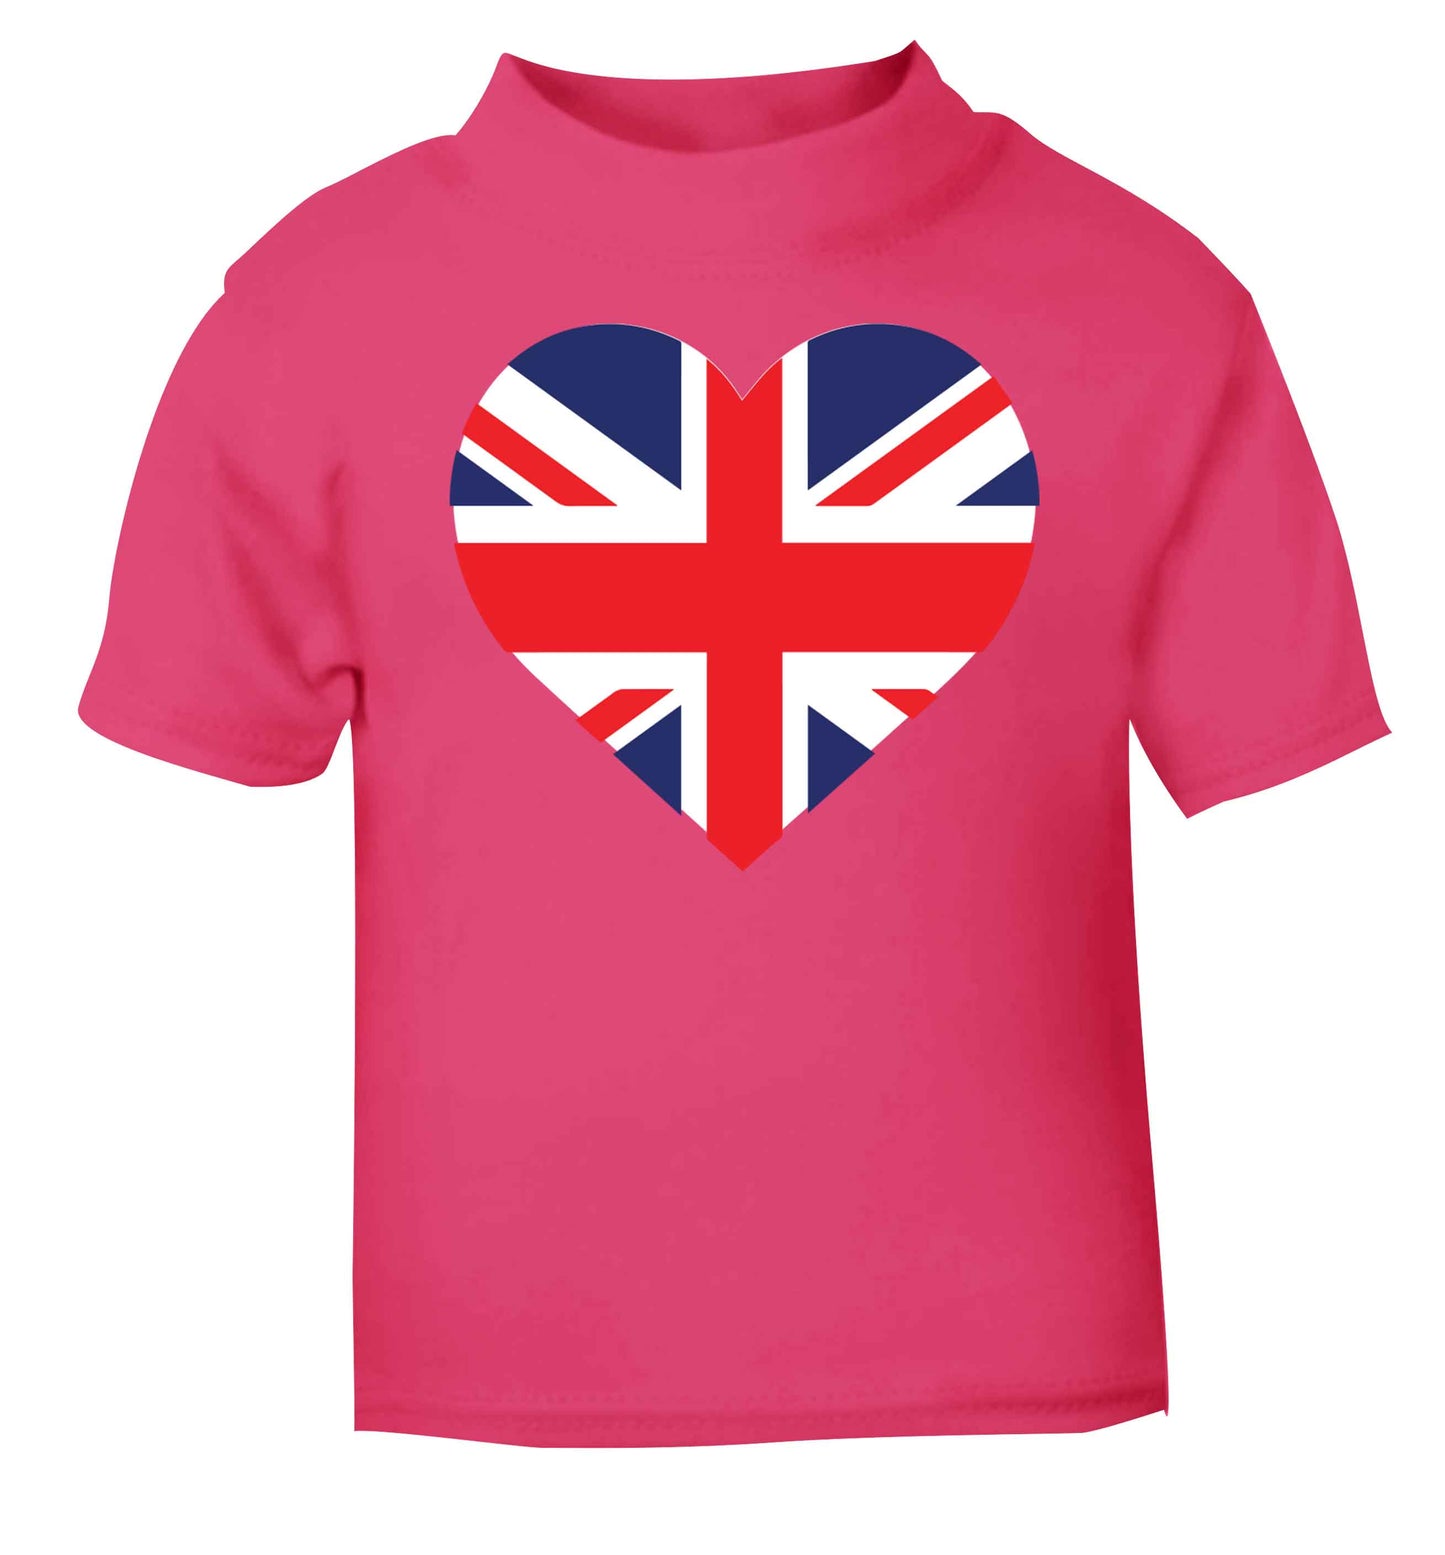 Union Jack Heart pink baby toddler Tshirt 2 Years